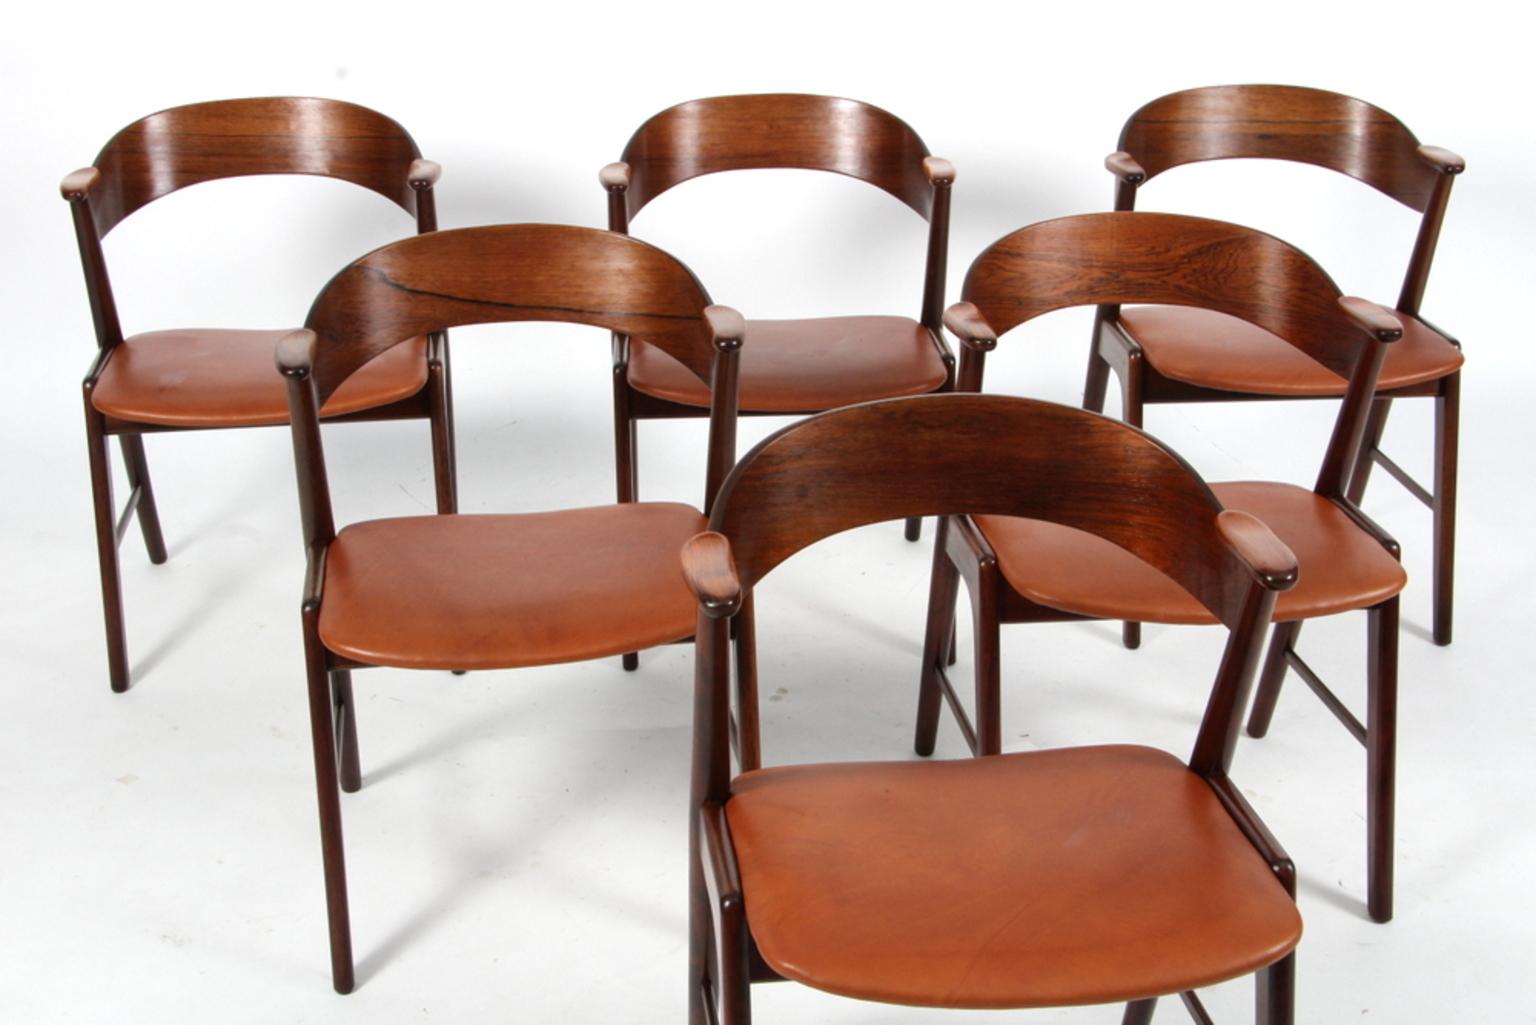 Kai Kristiansen for KS Møbler, set of 6 dining chairs, rosewood, fabric, Denmark, 1950s. 

The chairs show beautiful and well designed lines and joints. The curved back and armrests are mounted on the oblique rear legs, which provides an open,